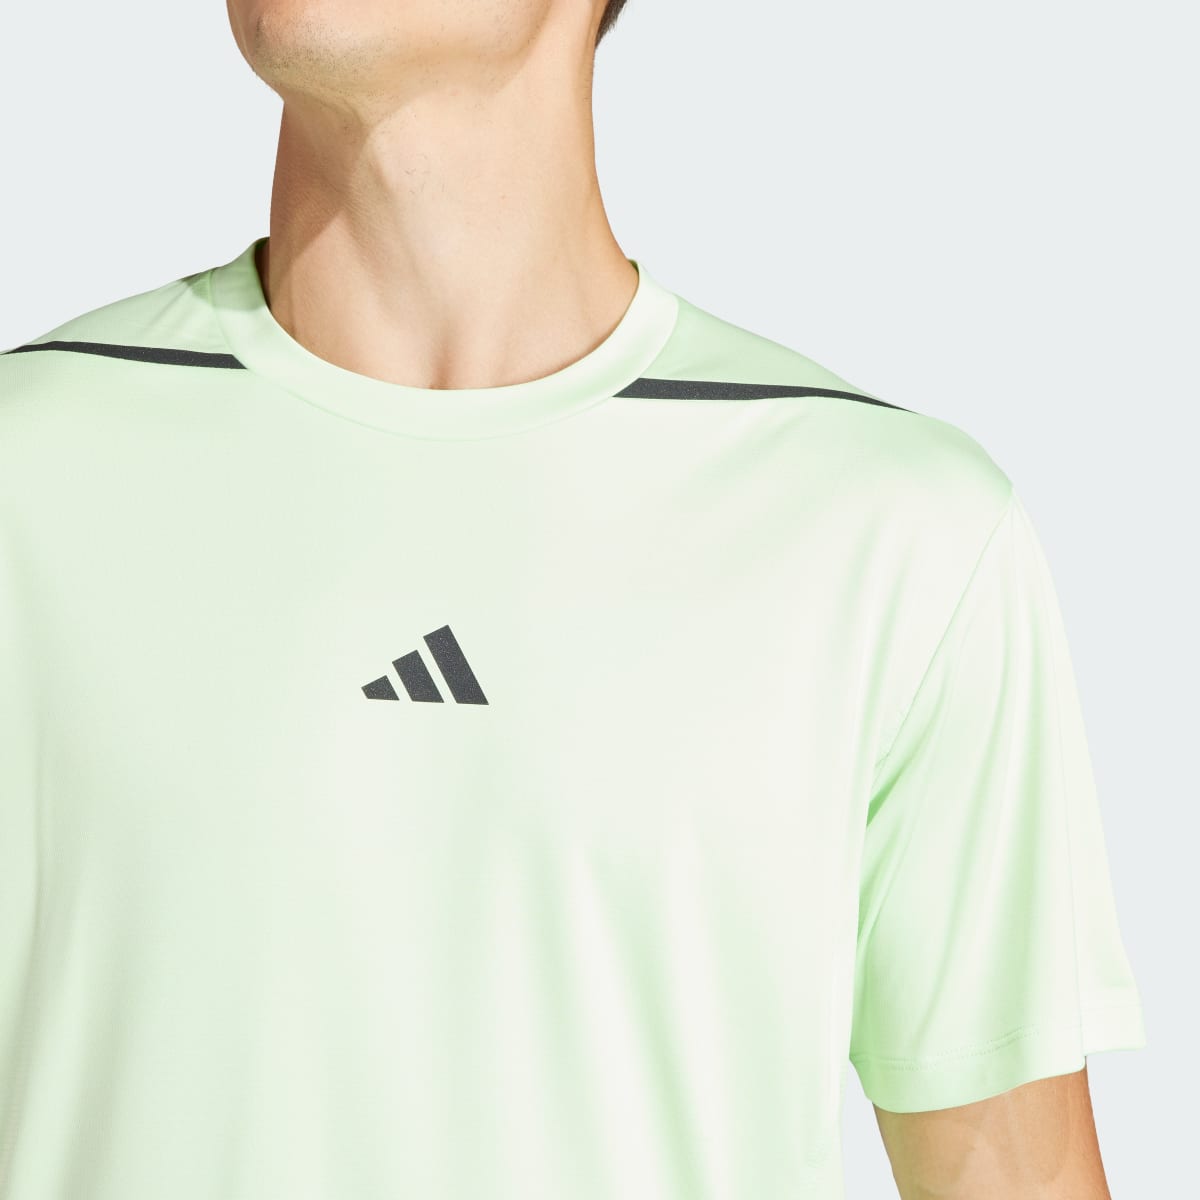 Adidas Designed for Training Adistrong Workout Tee. 6